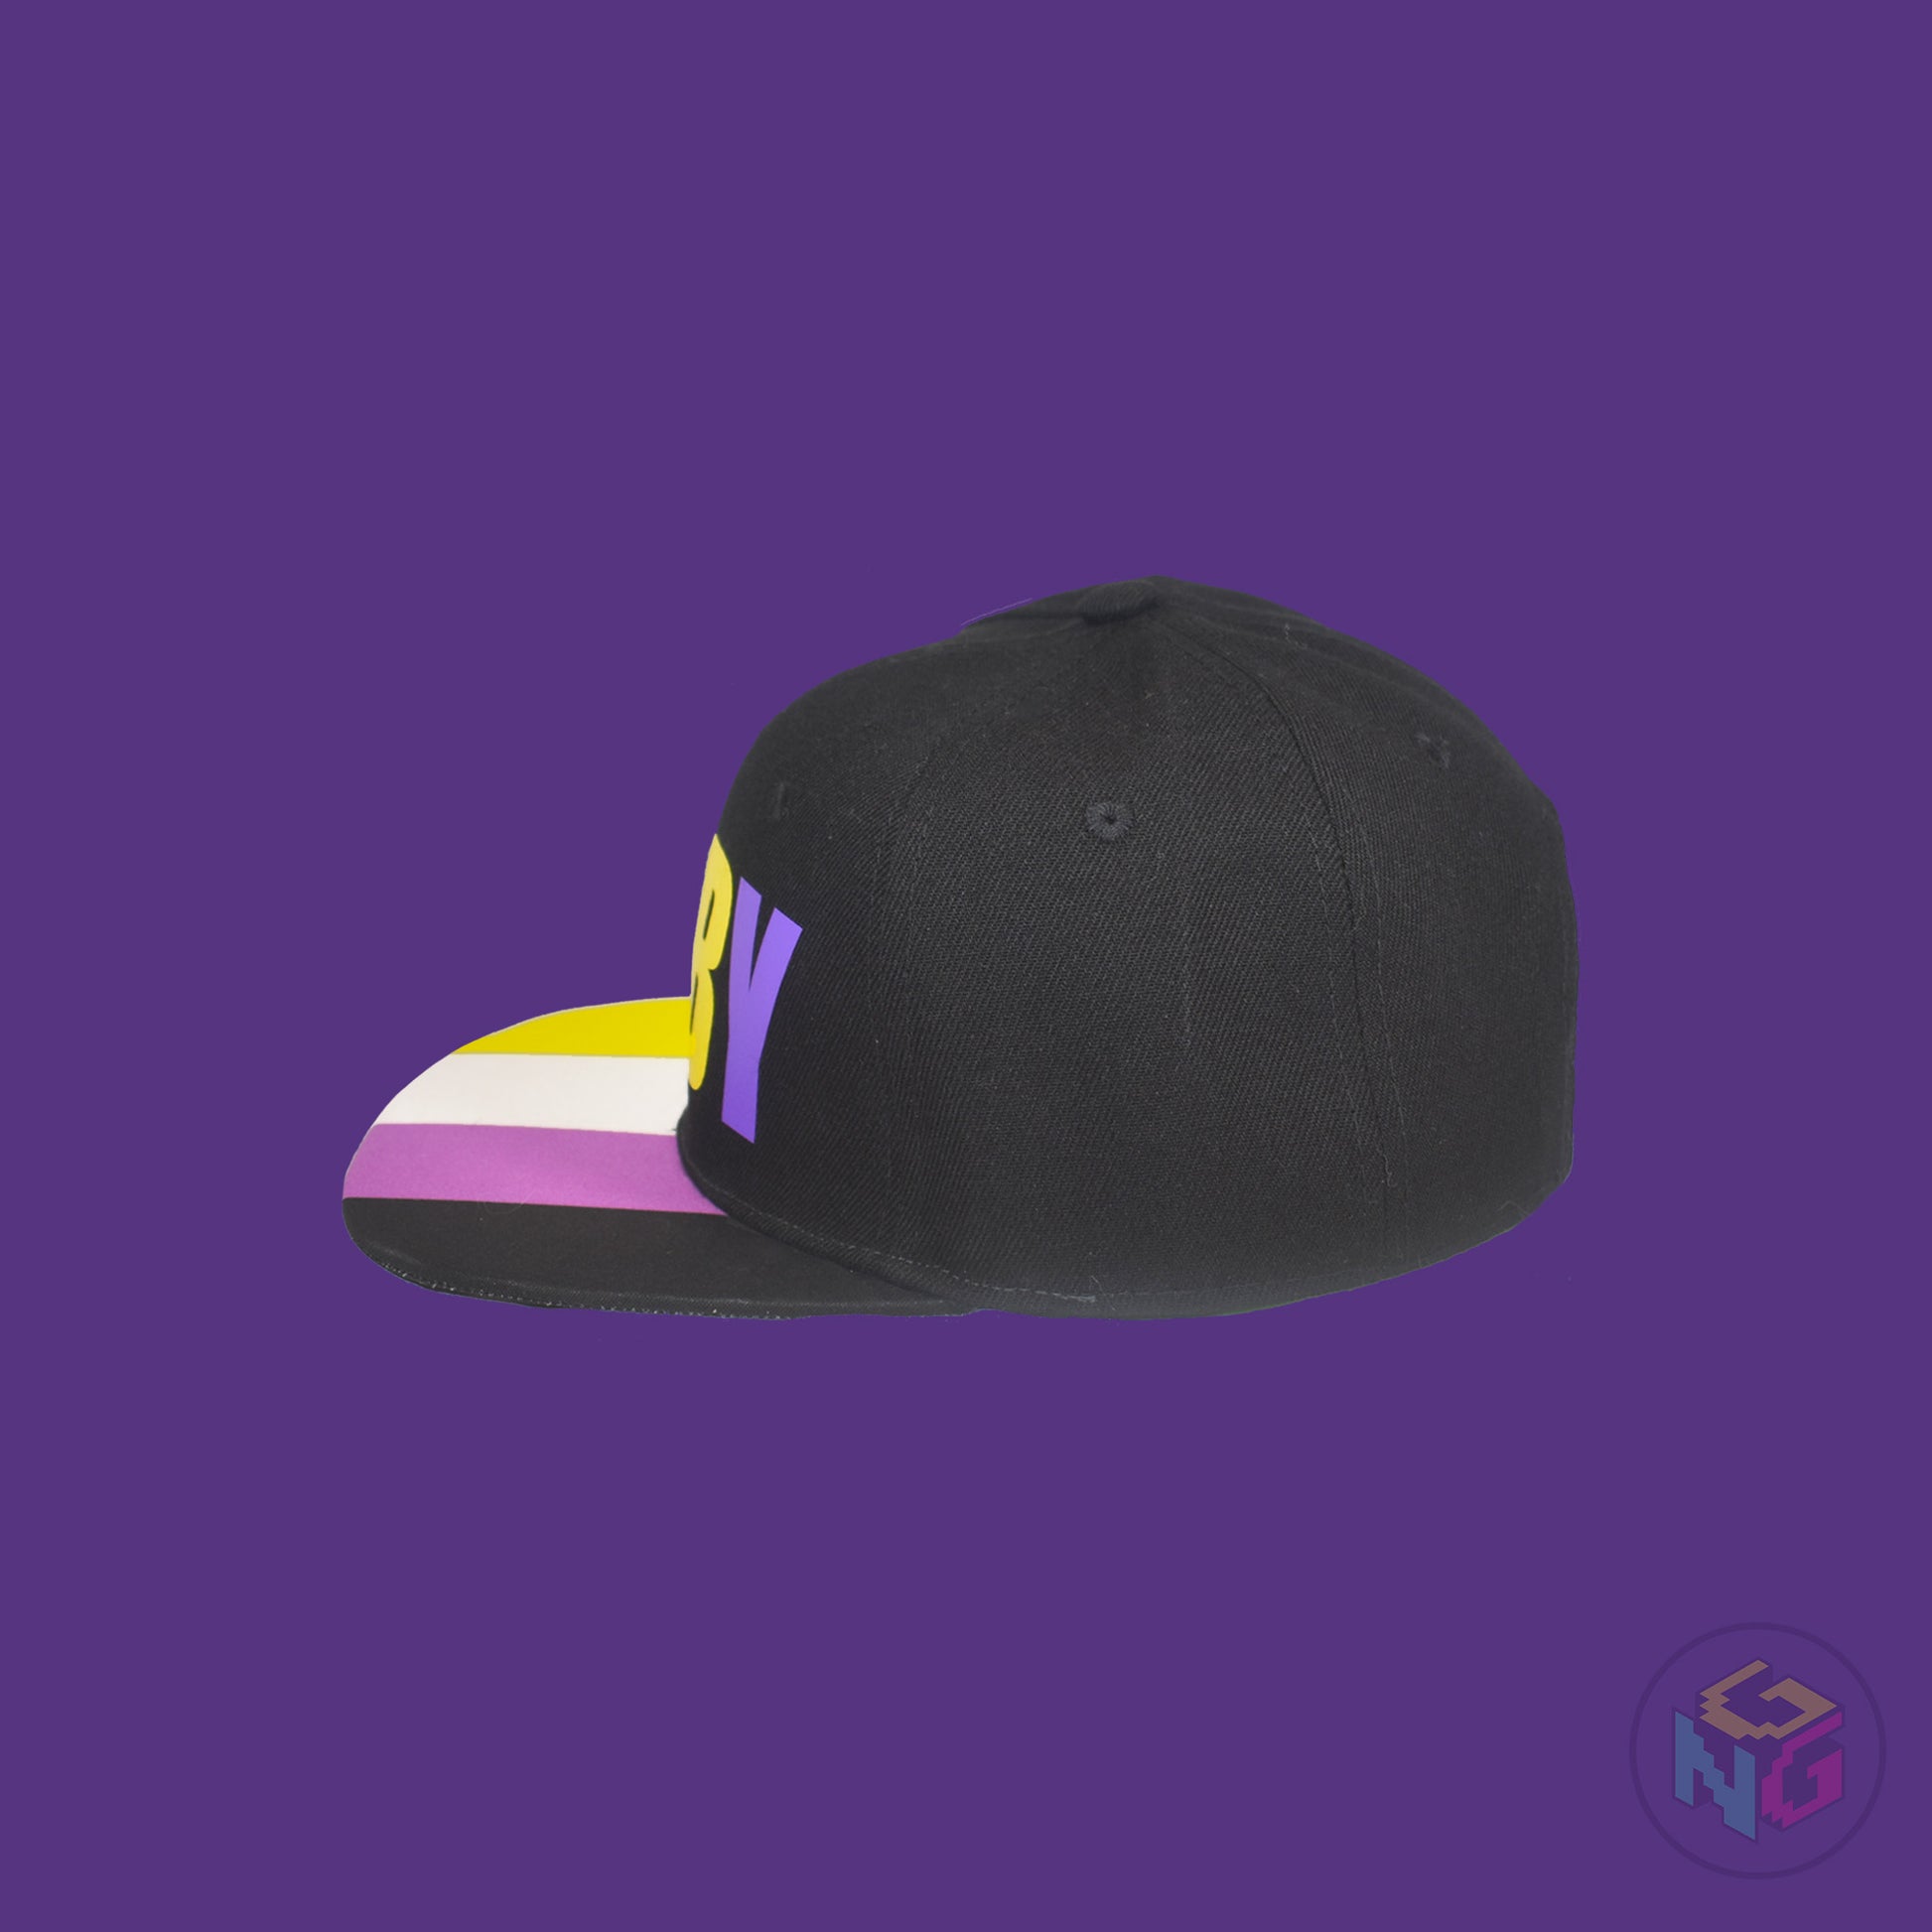 Black flat bill snapback hat. The brim has the nonbinary pride flag on both sides and the front of the hat has the word “ENBY” in yellow and purple letters. Left view